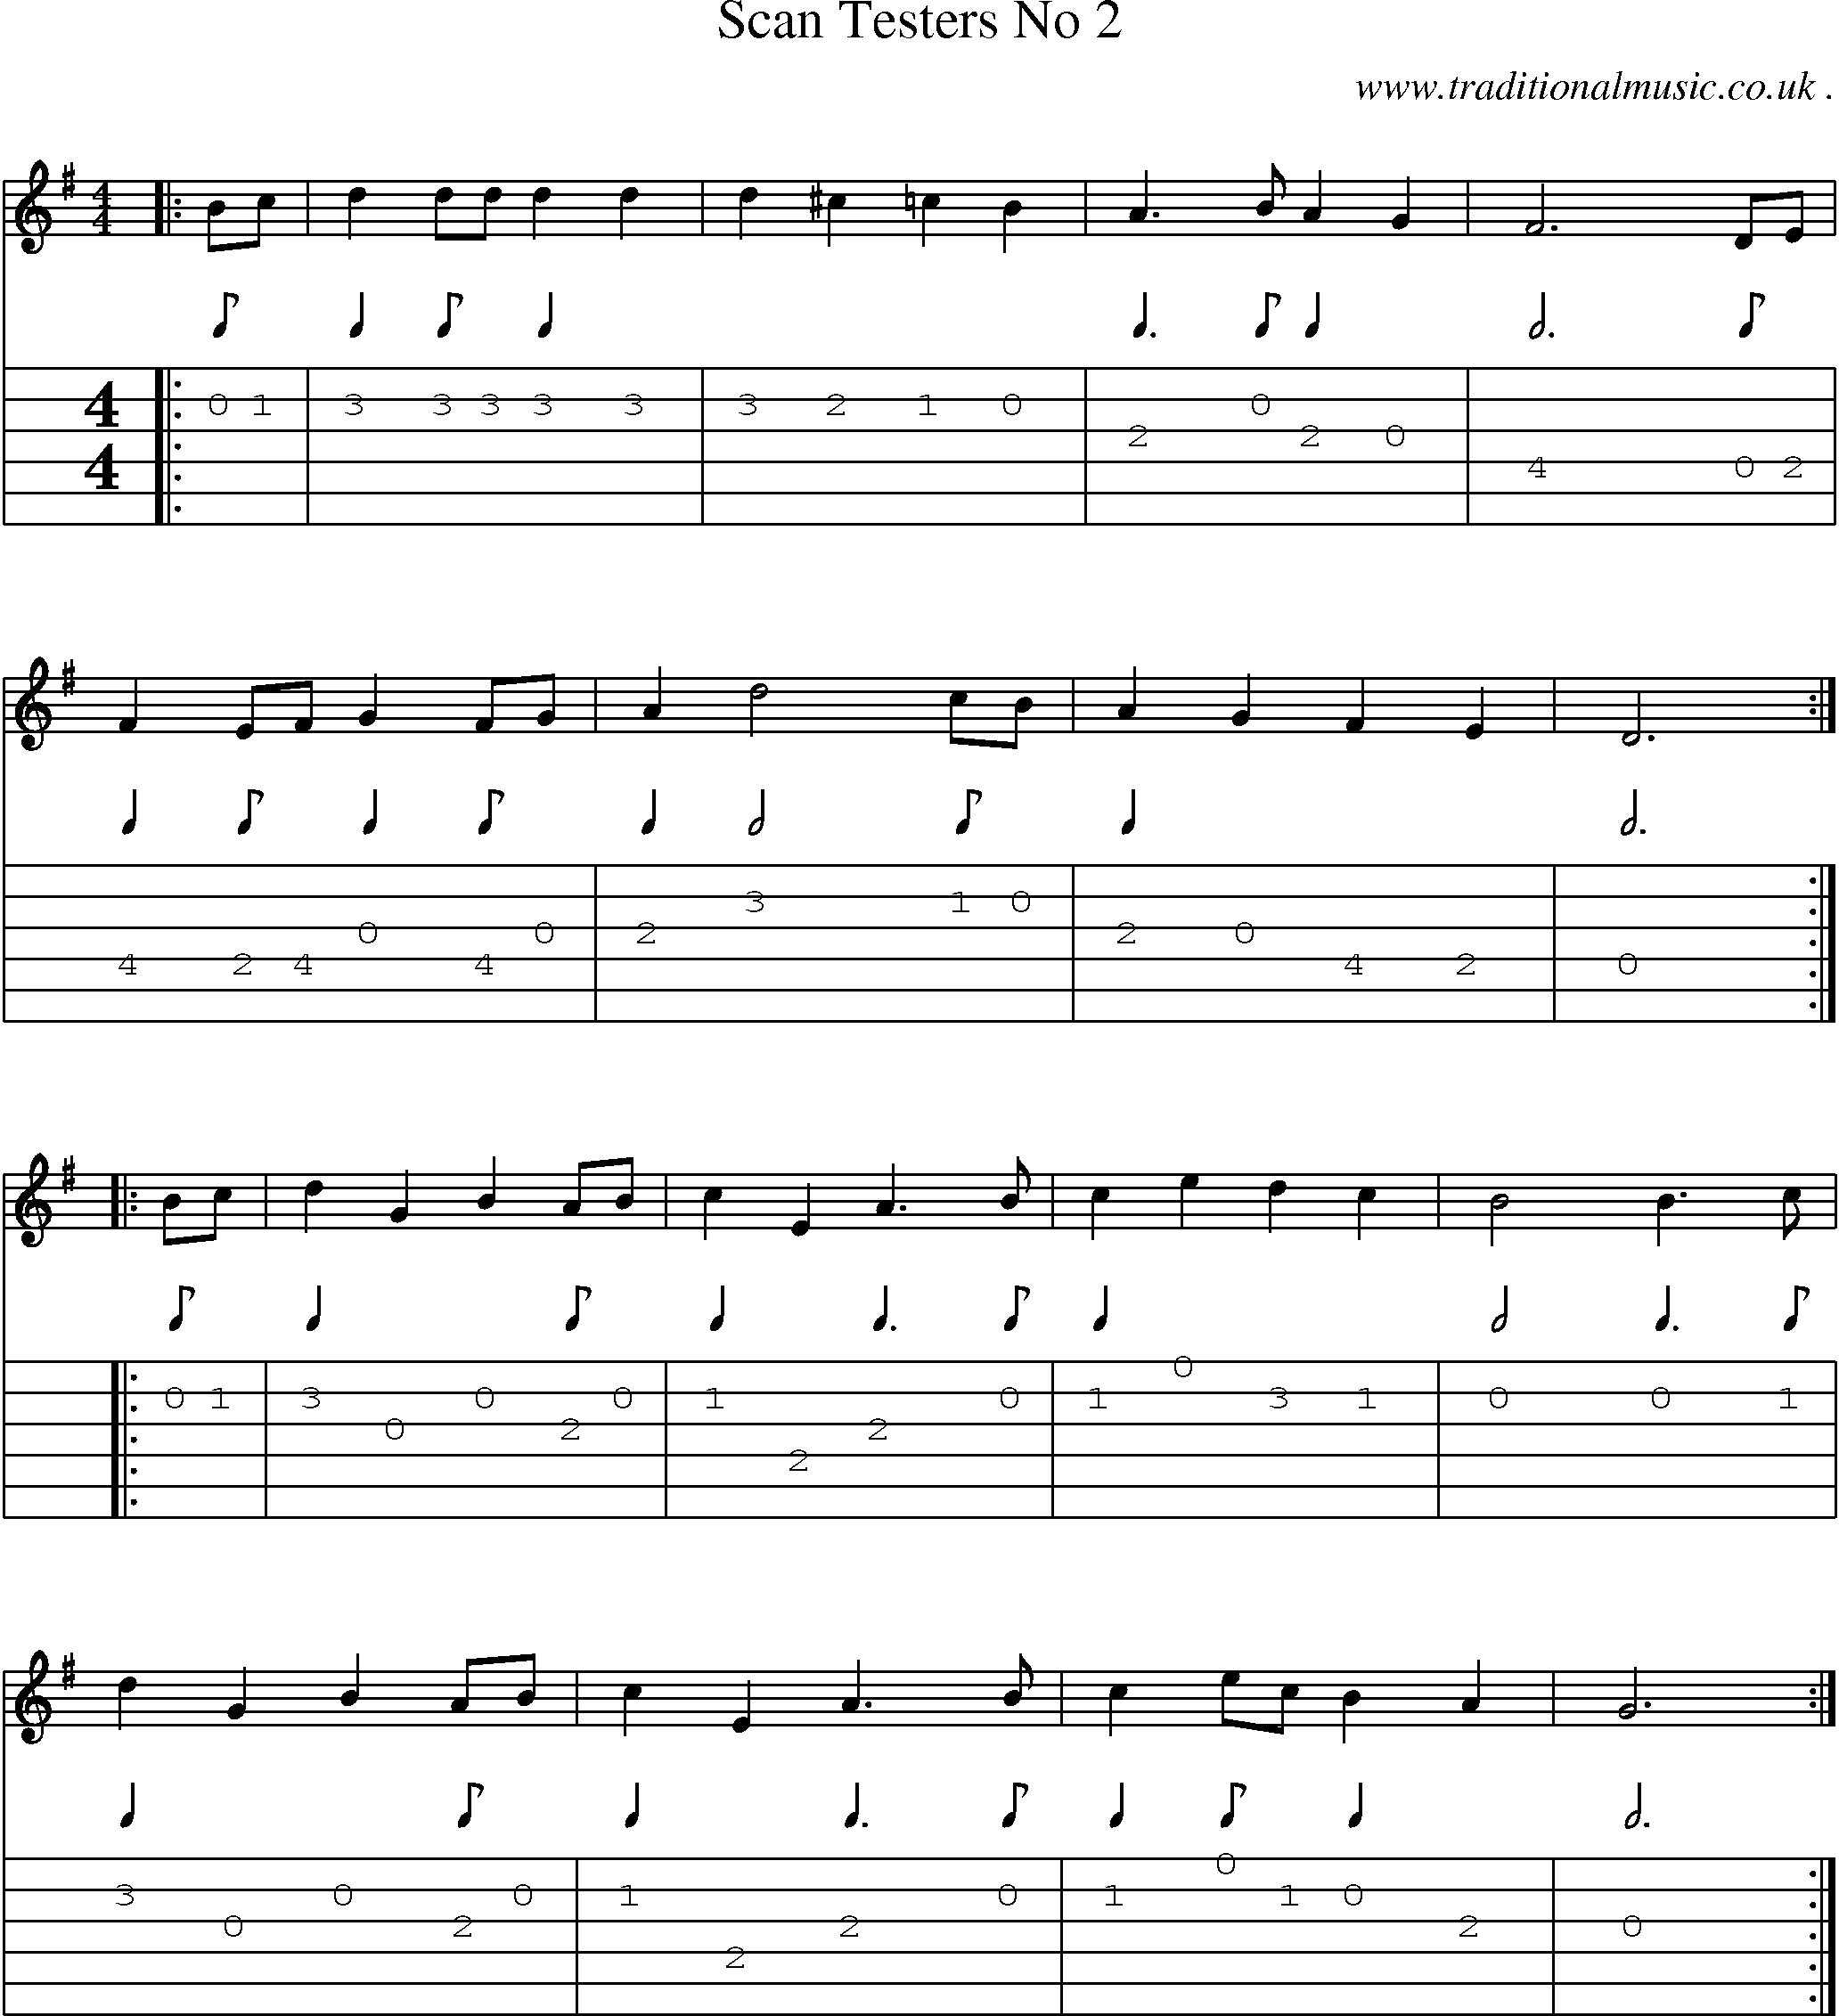 Sheet-Music and Guitar Tabs for Scan Testers No 2